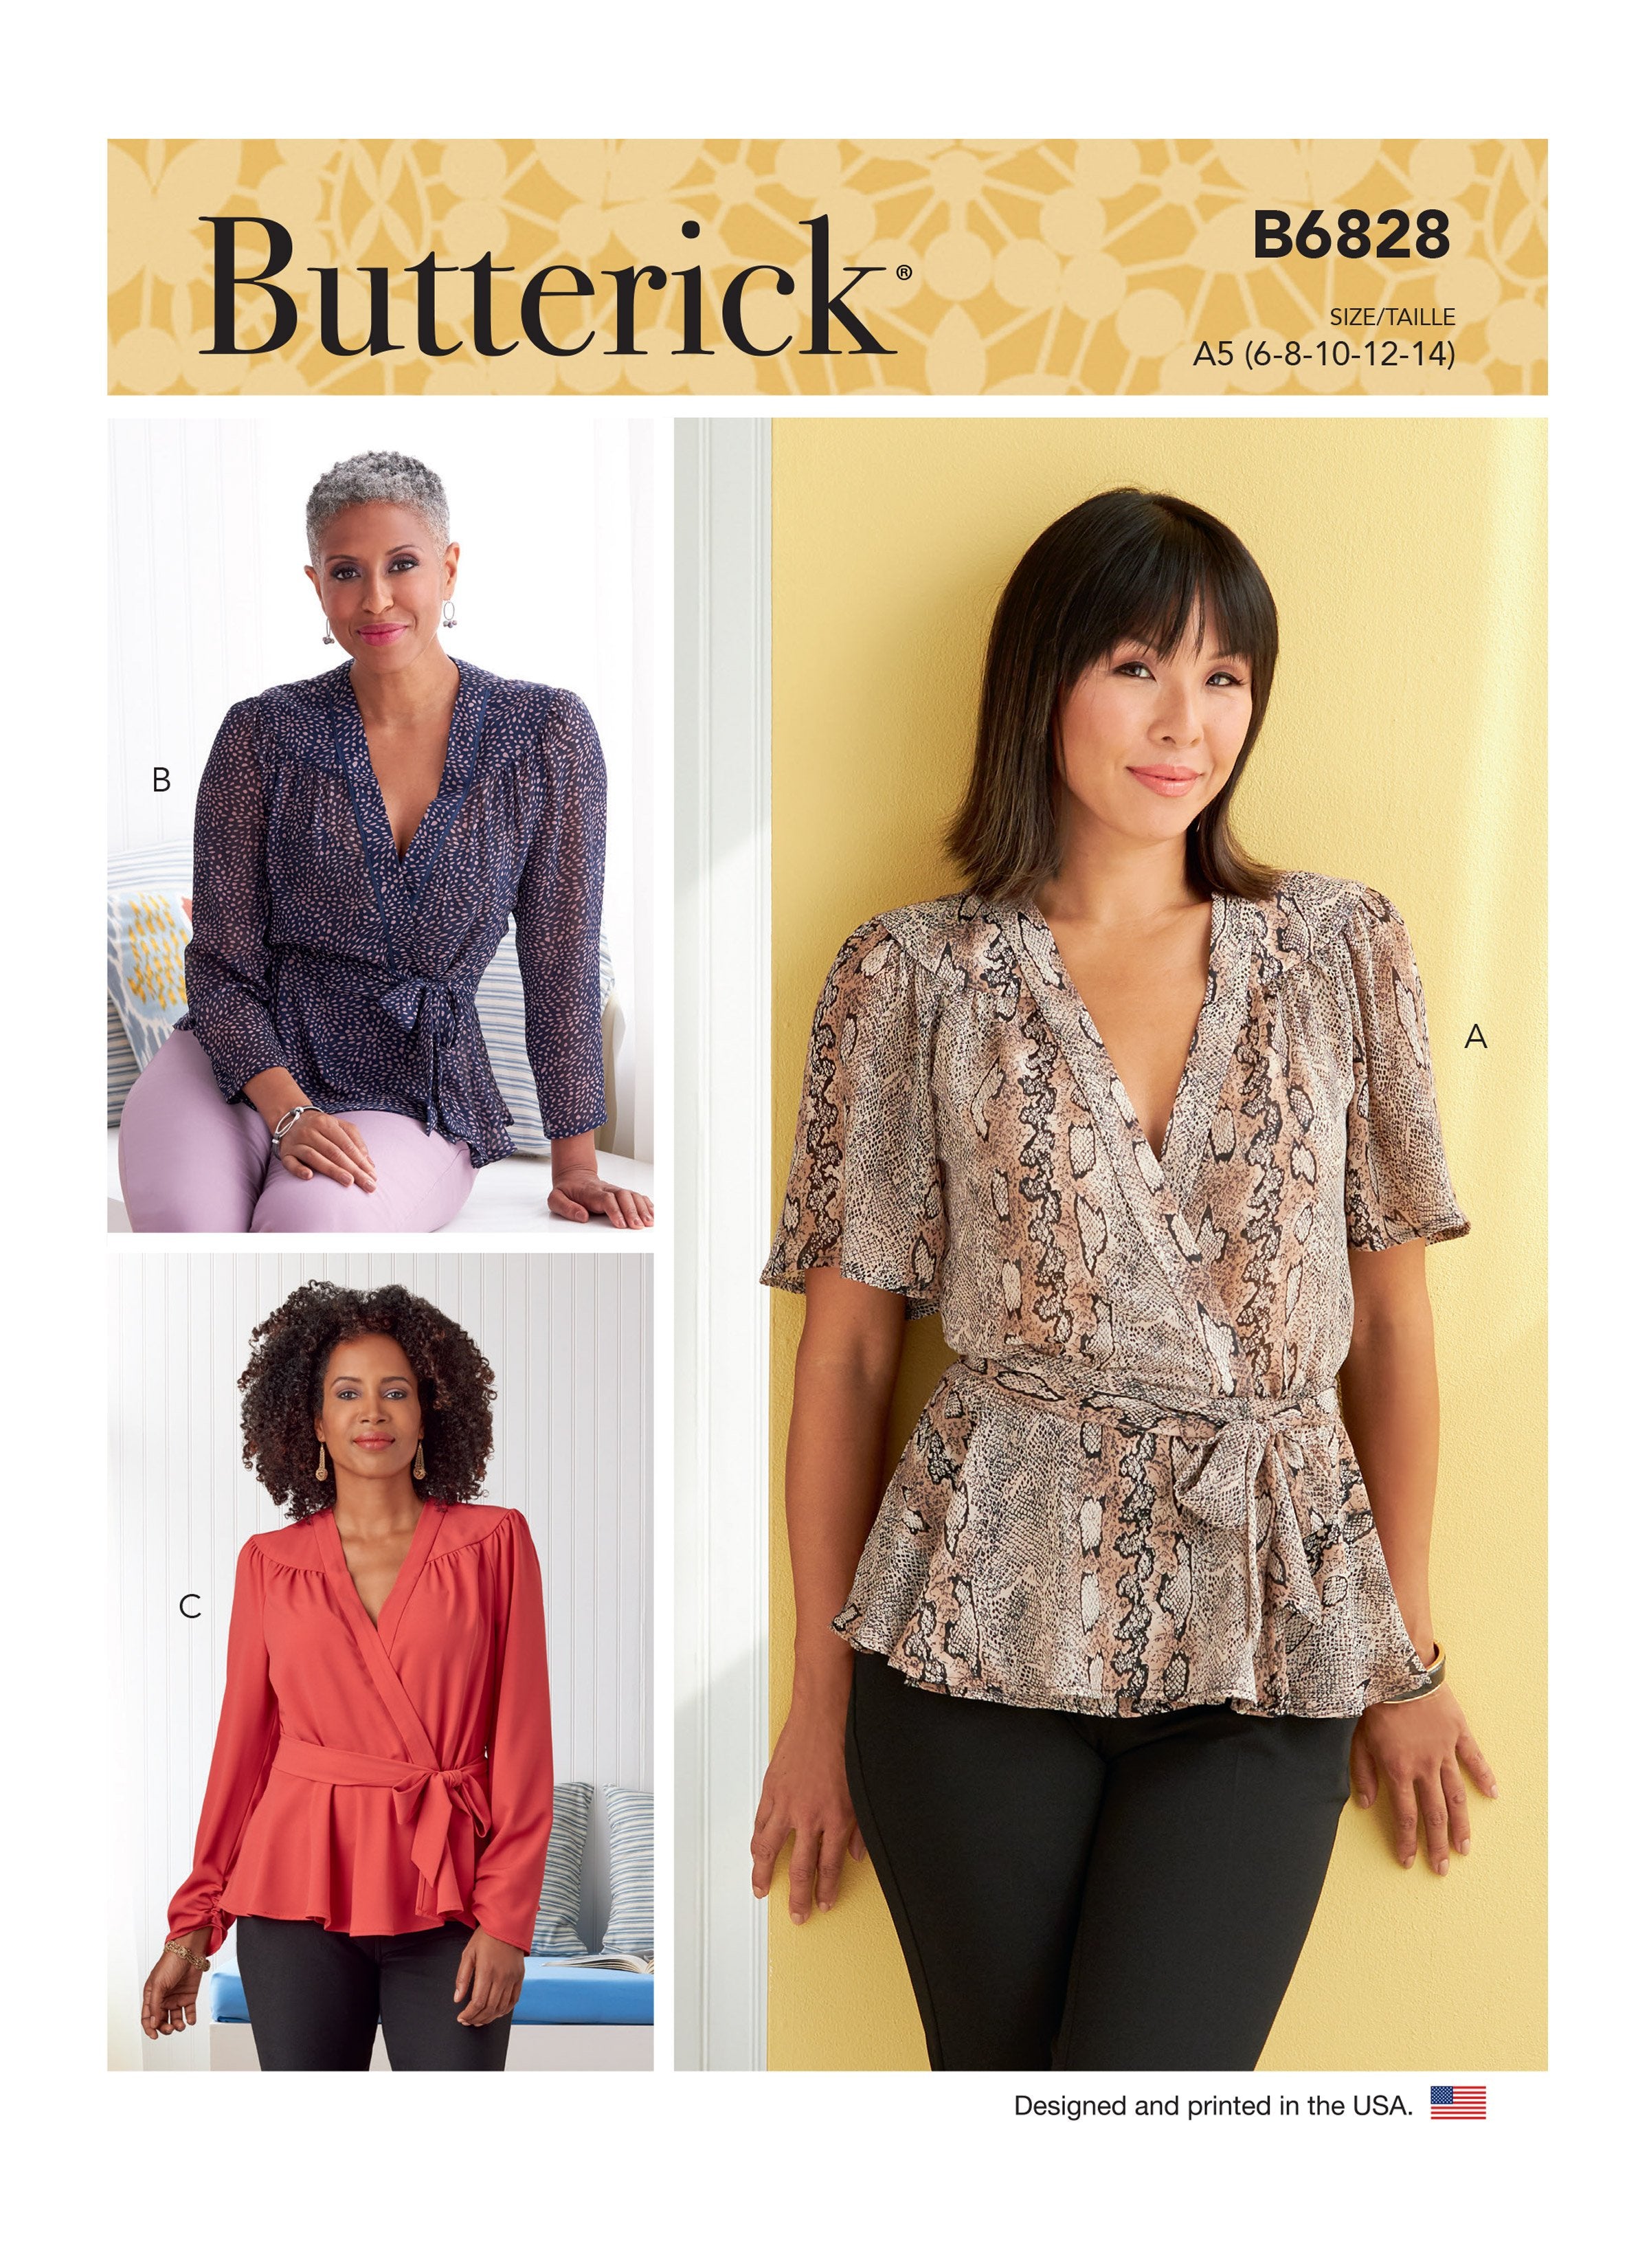 Butterick sewing pattern 6828 Misses' Tops from Jaycotts Sewing Supplies